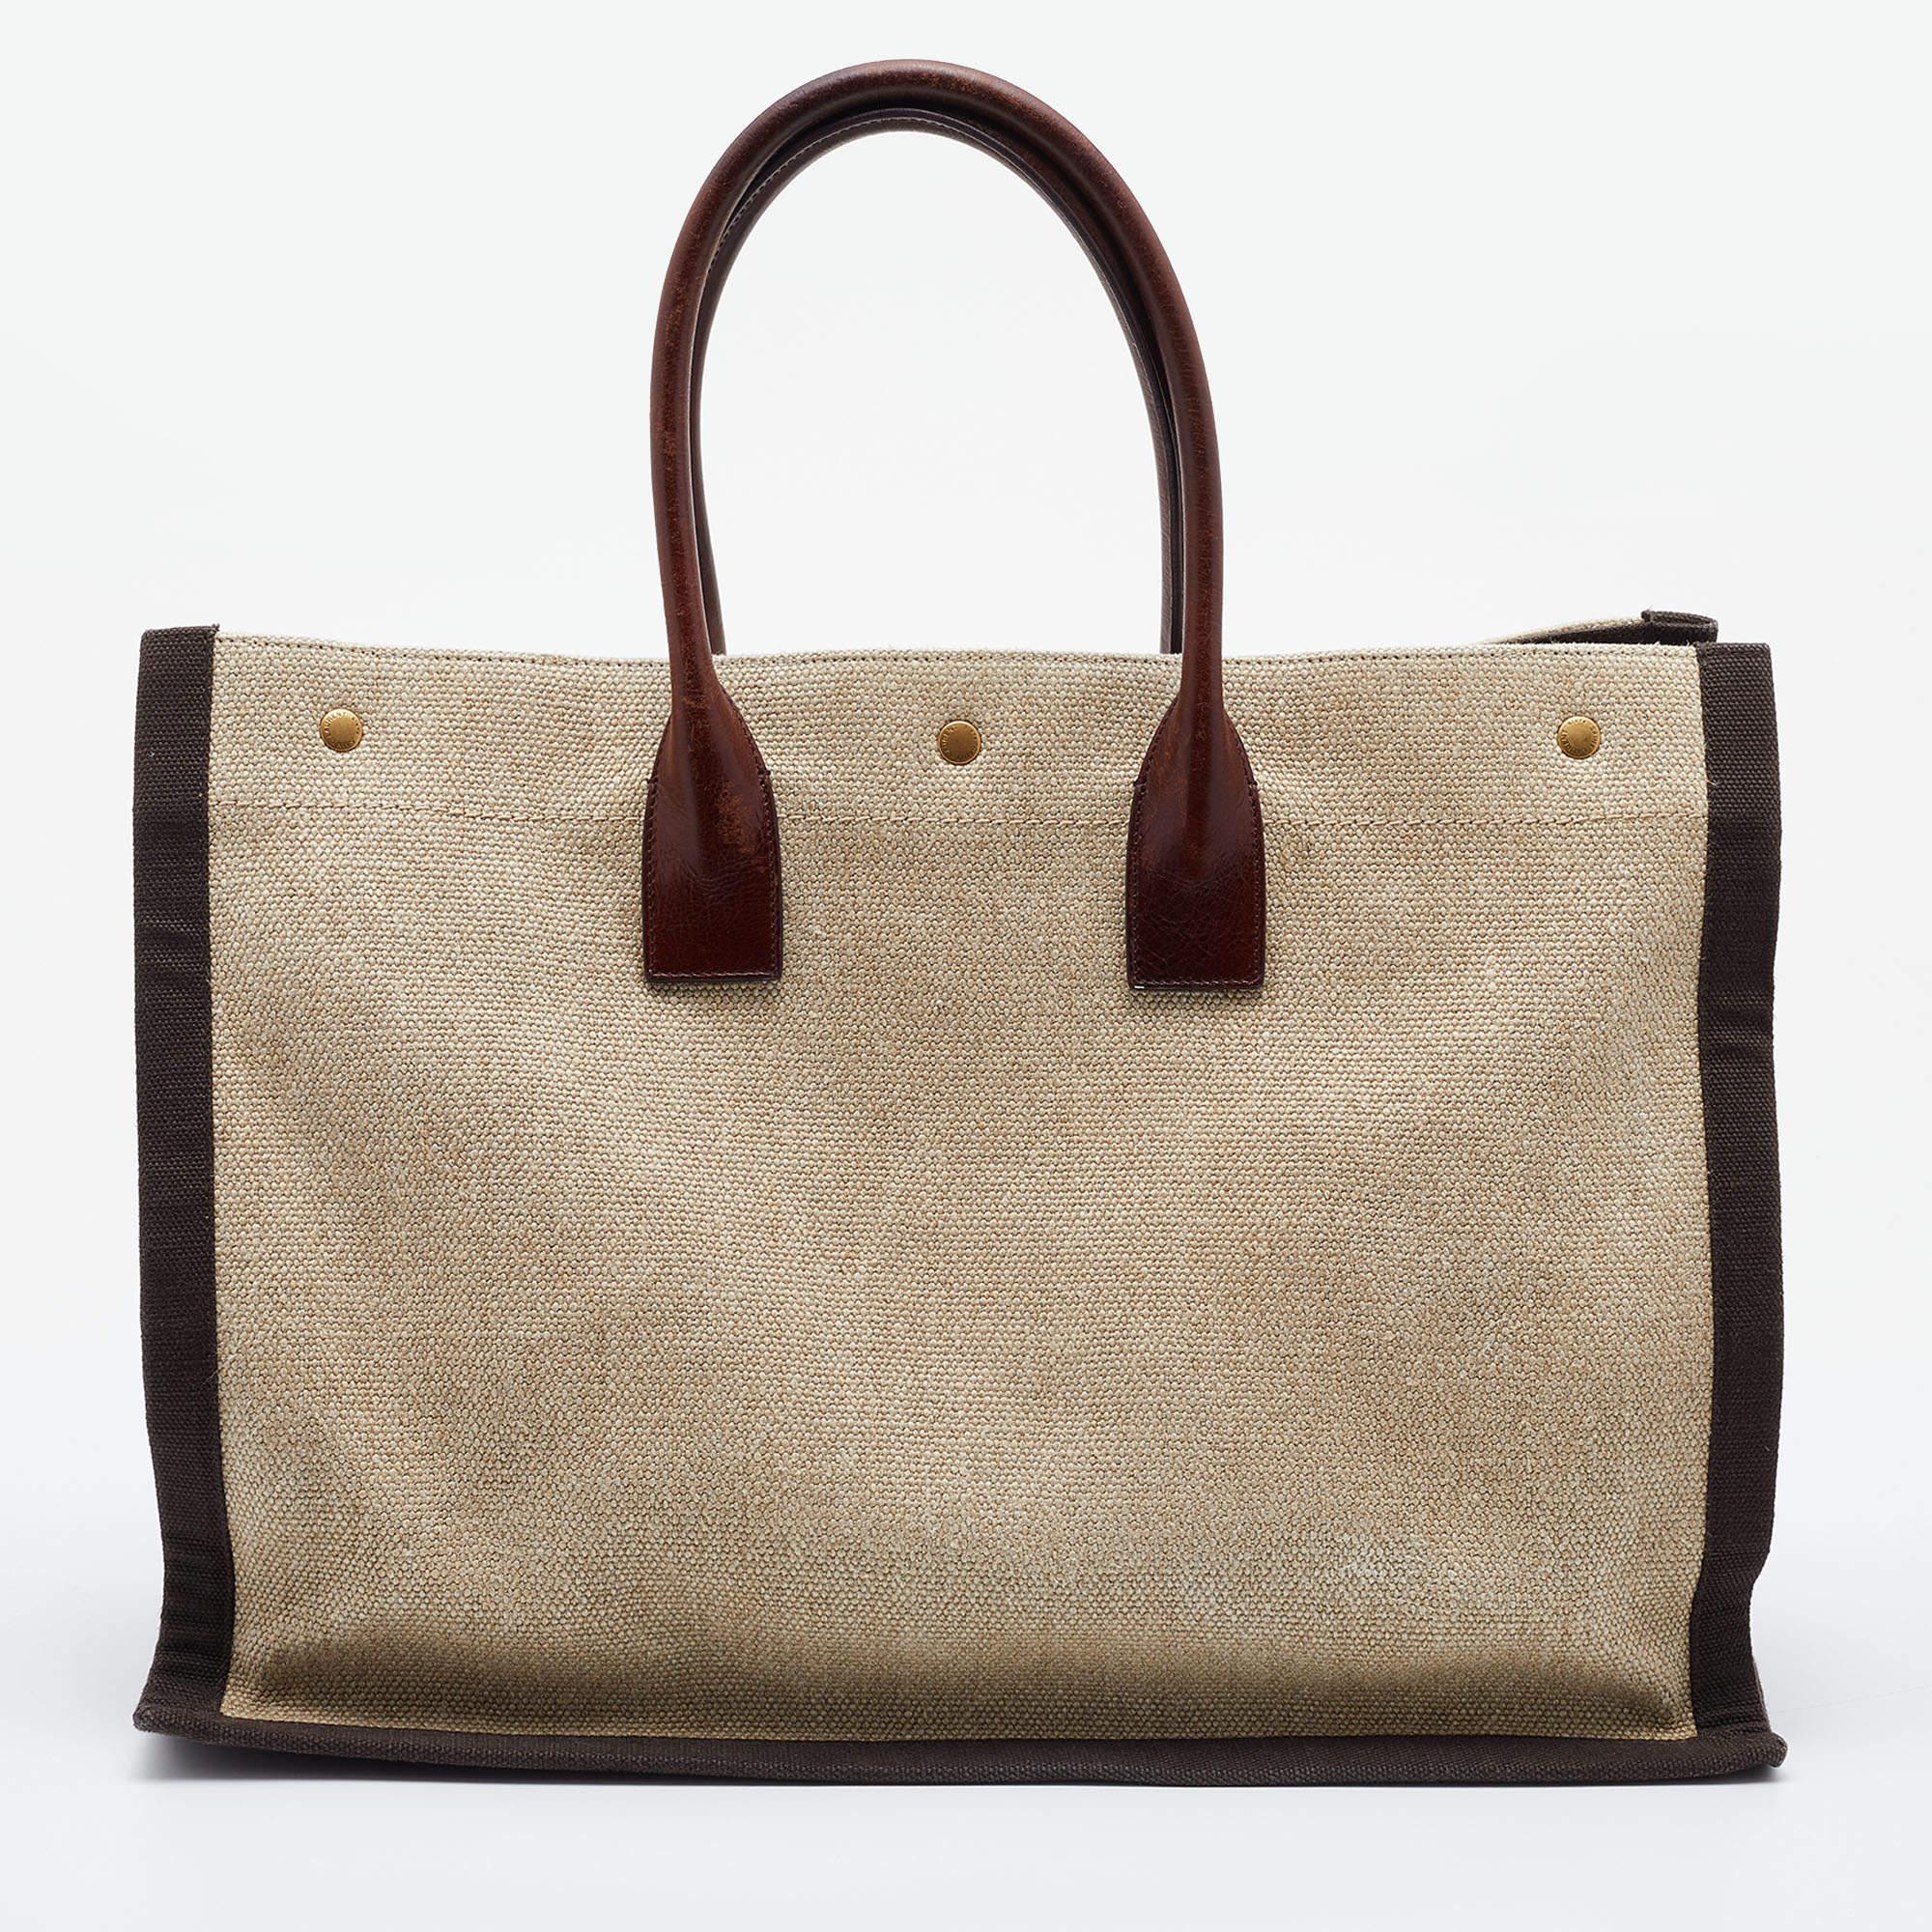 Visually appealing and incredibly stylish is this classic Rive Gauche tote. Lined with a durable fabric, this will easily last you season after season. From the house of Saint Laurent, this bag is an outstanding fusion of brilliance and